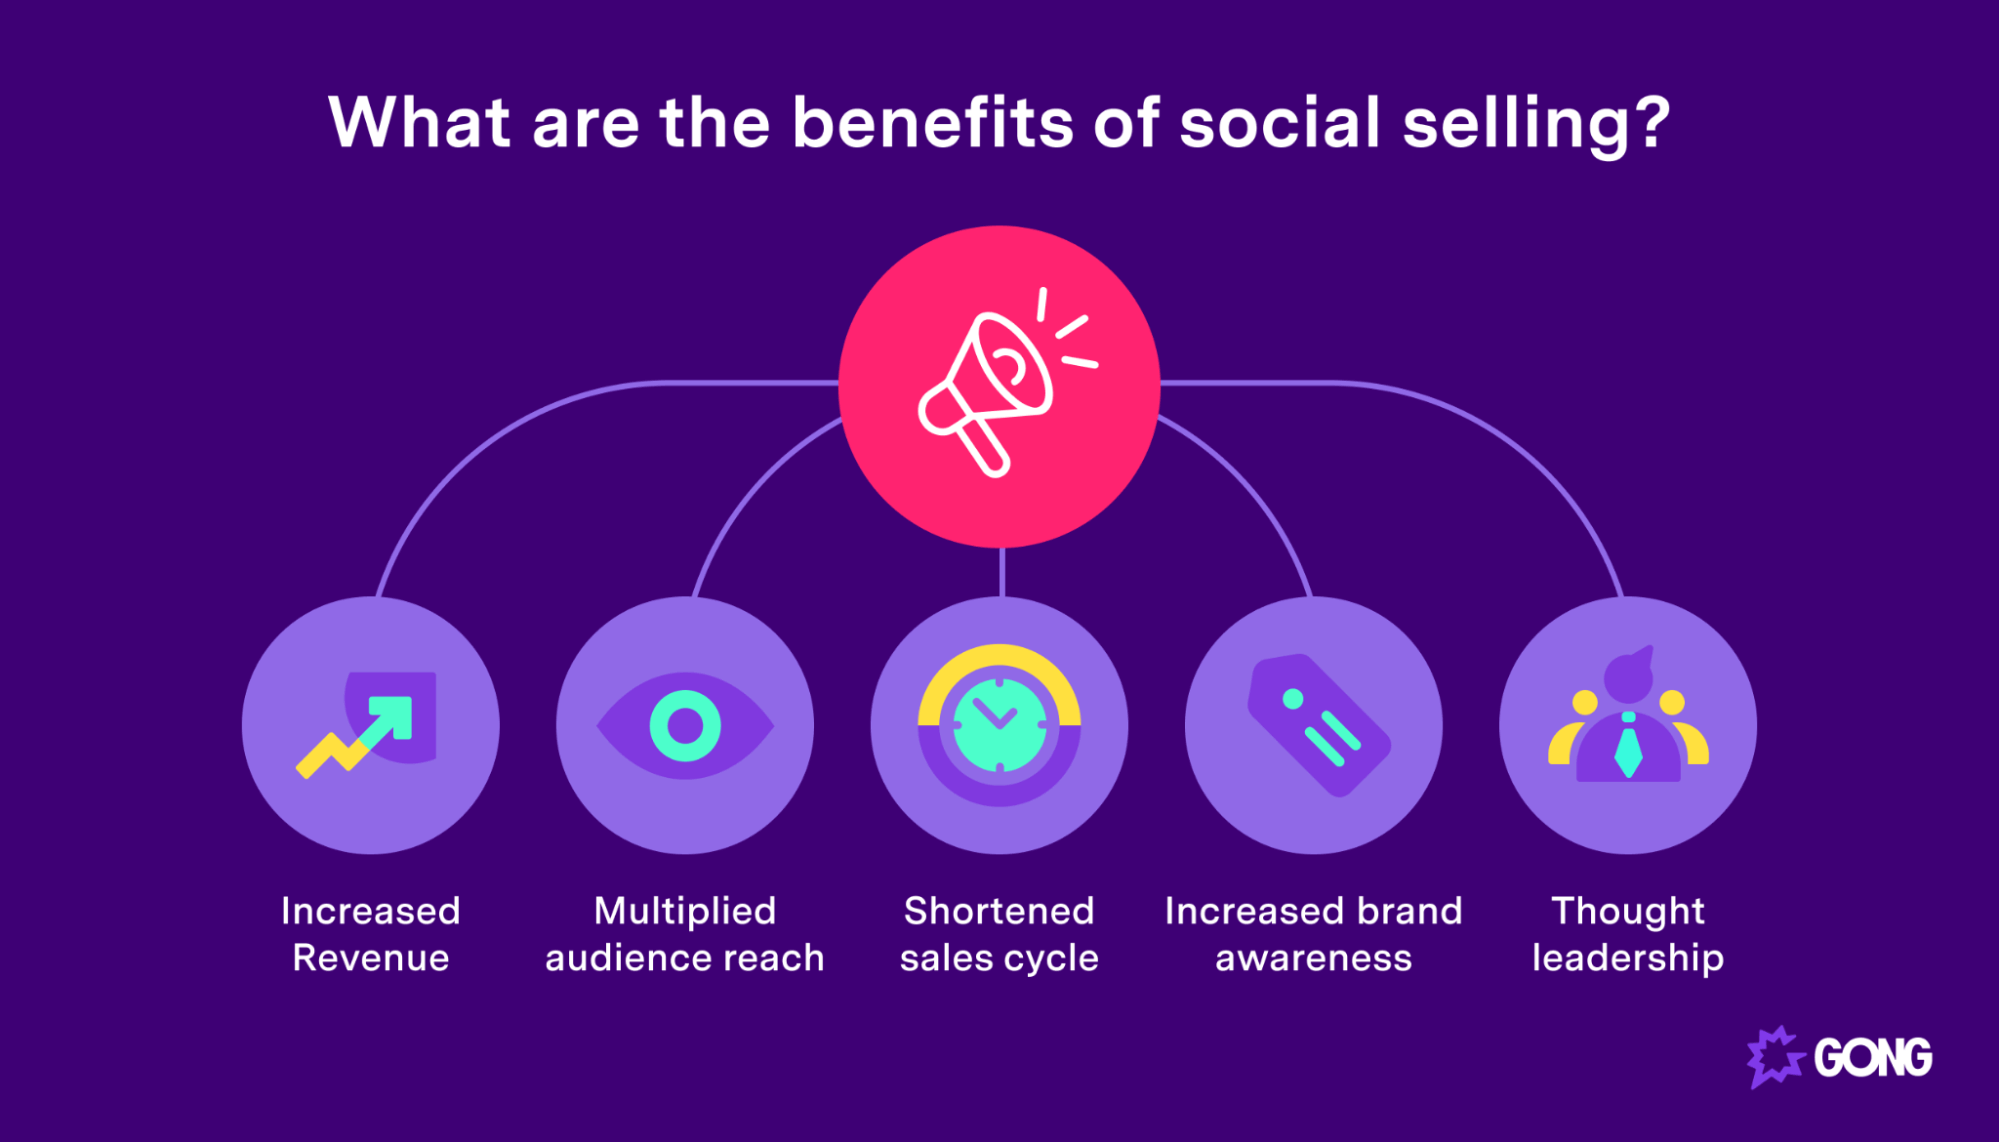 An image showing the benefits of social selling